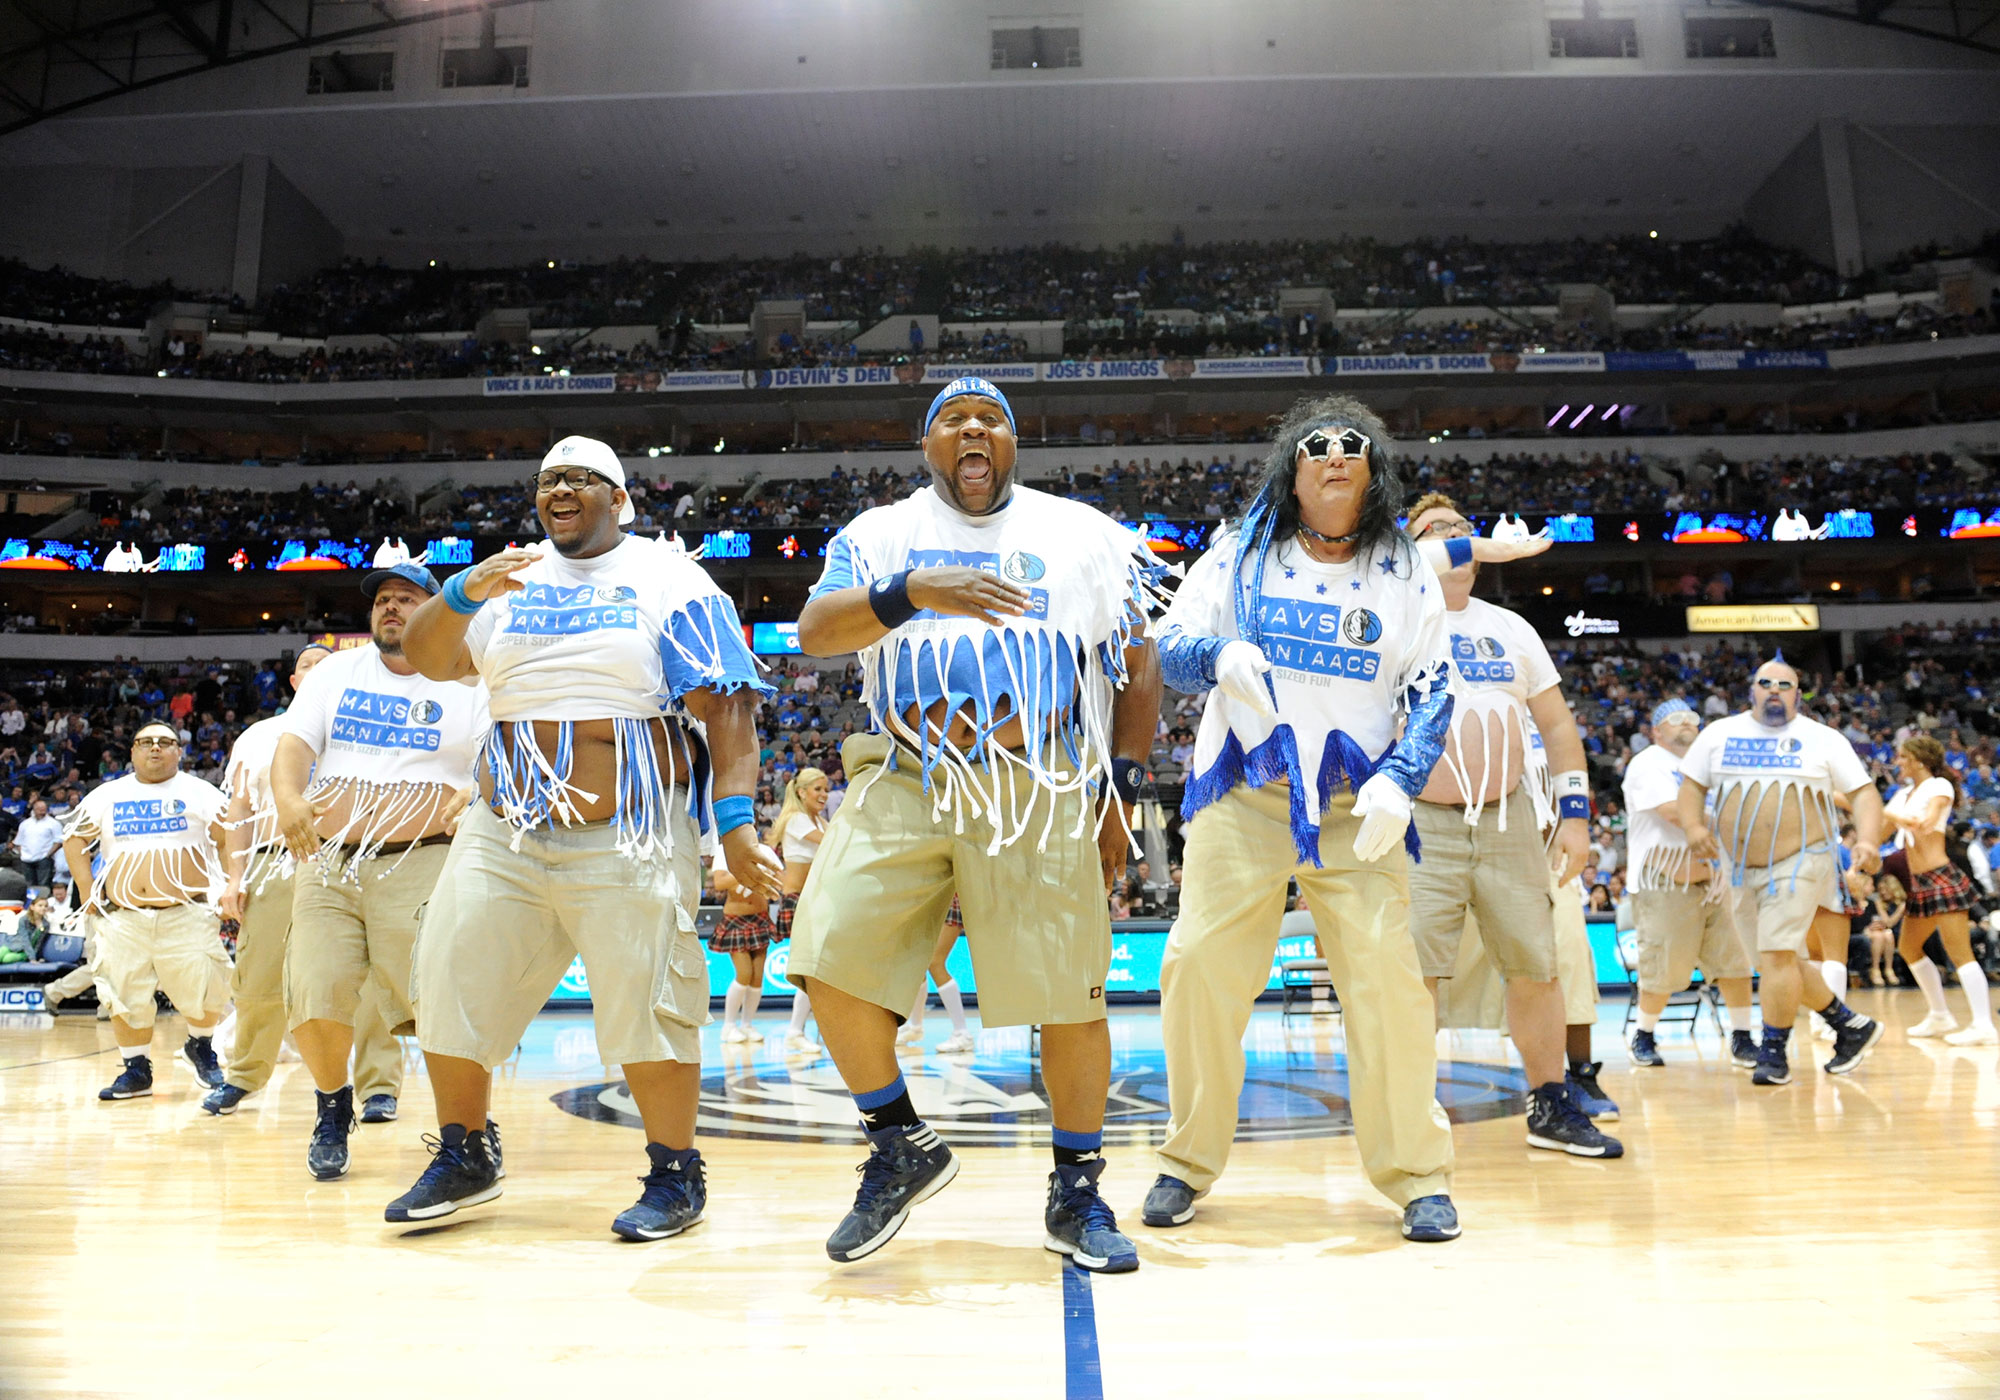 The Mavs ManiAACs perform during an NBA game between the Golden State Warriors and the Dallas Mavericks at the American Airlines Center in Dallas, TX on April 1, 2014. (Albert Pena—Icon SMI/Corbis via Getty Images)